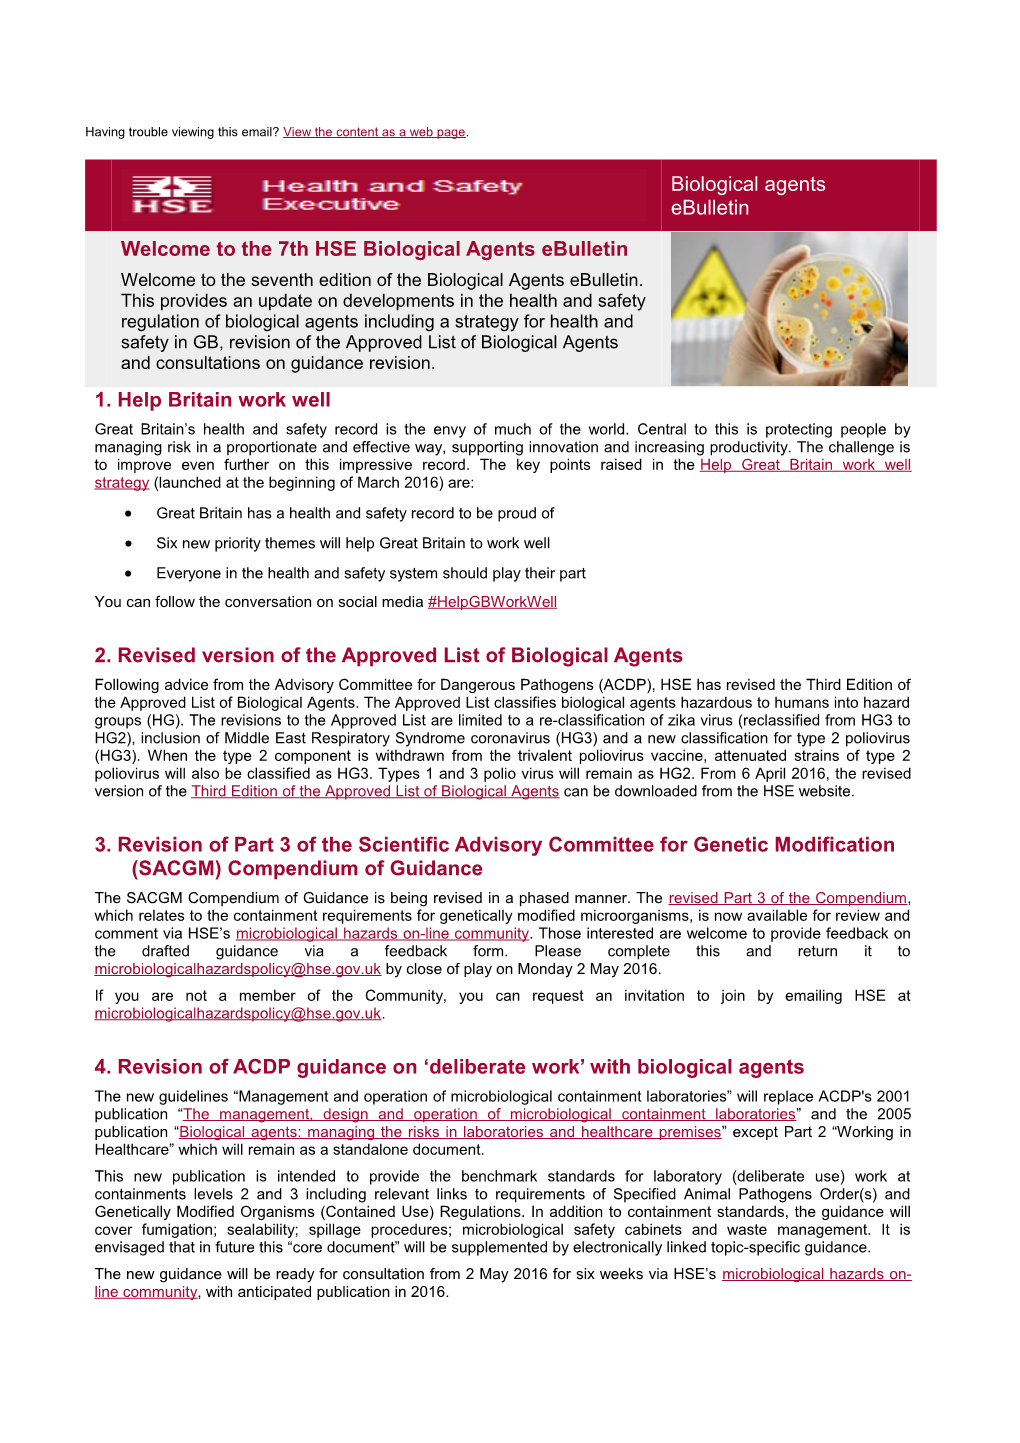 Welcome to the 7Th Hsebiological Agentsebulletin